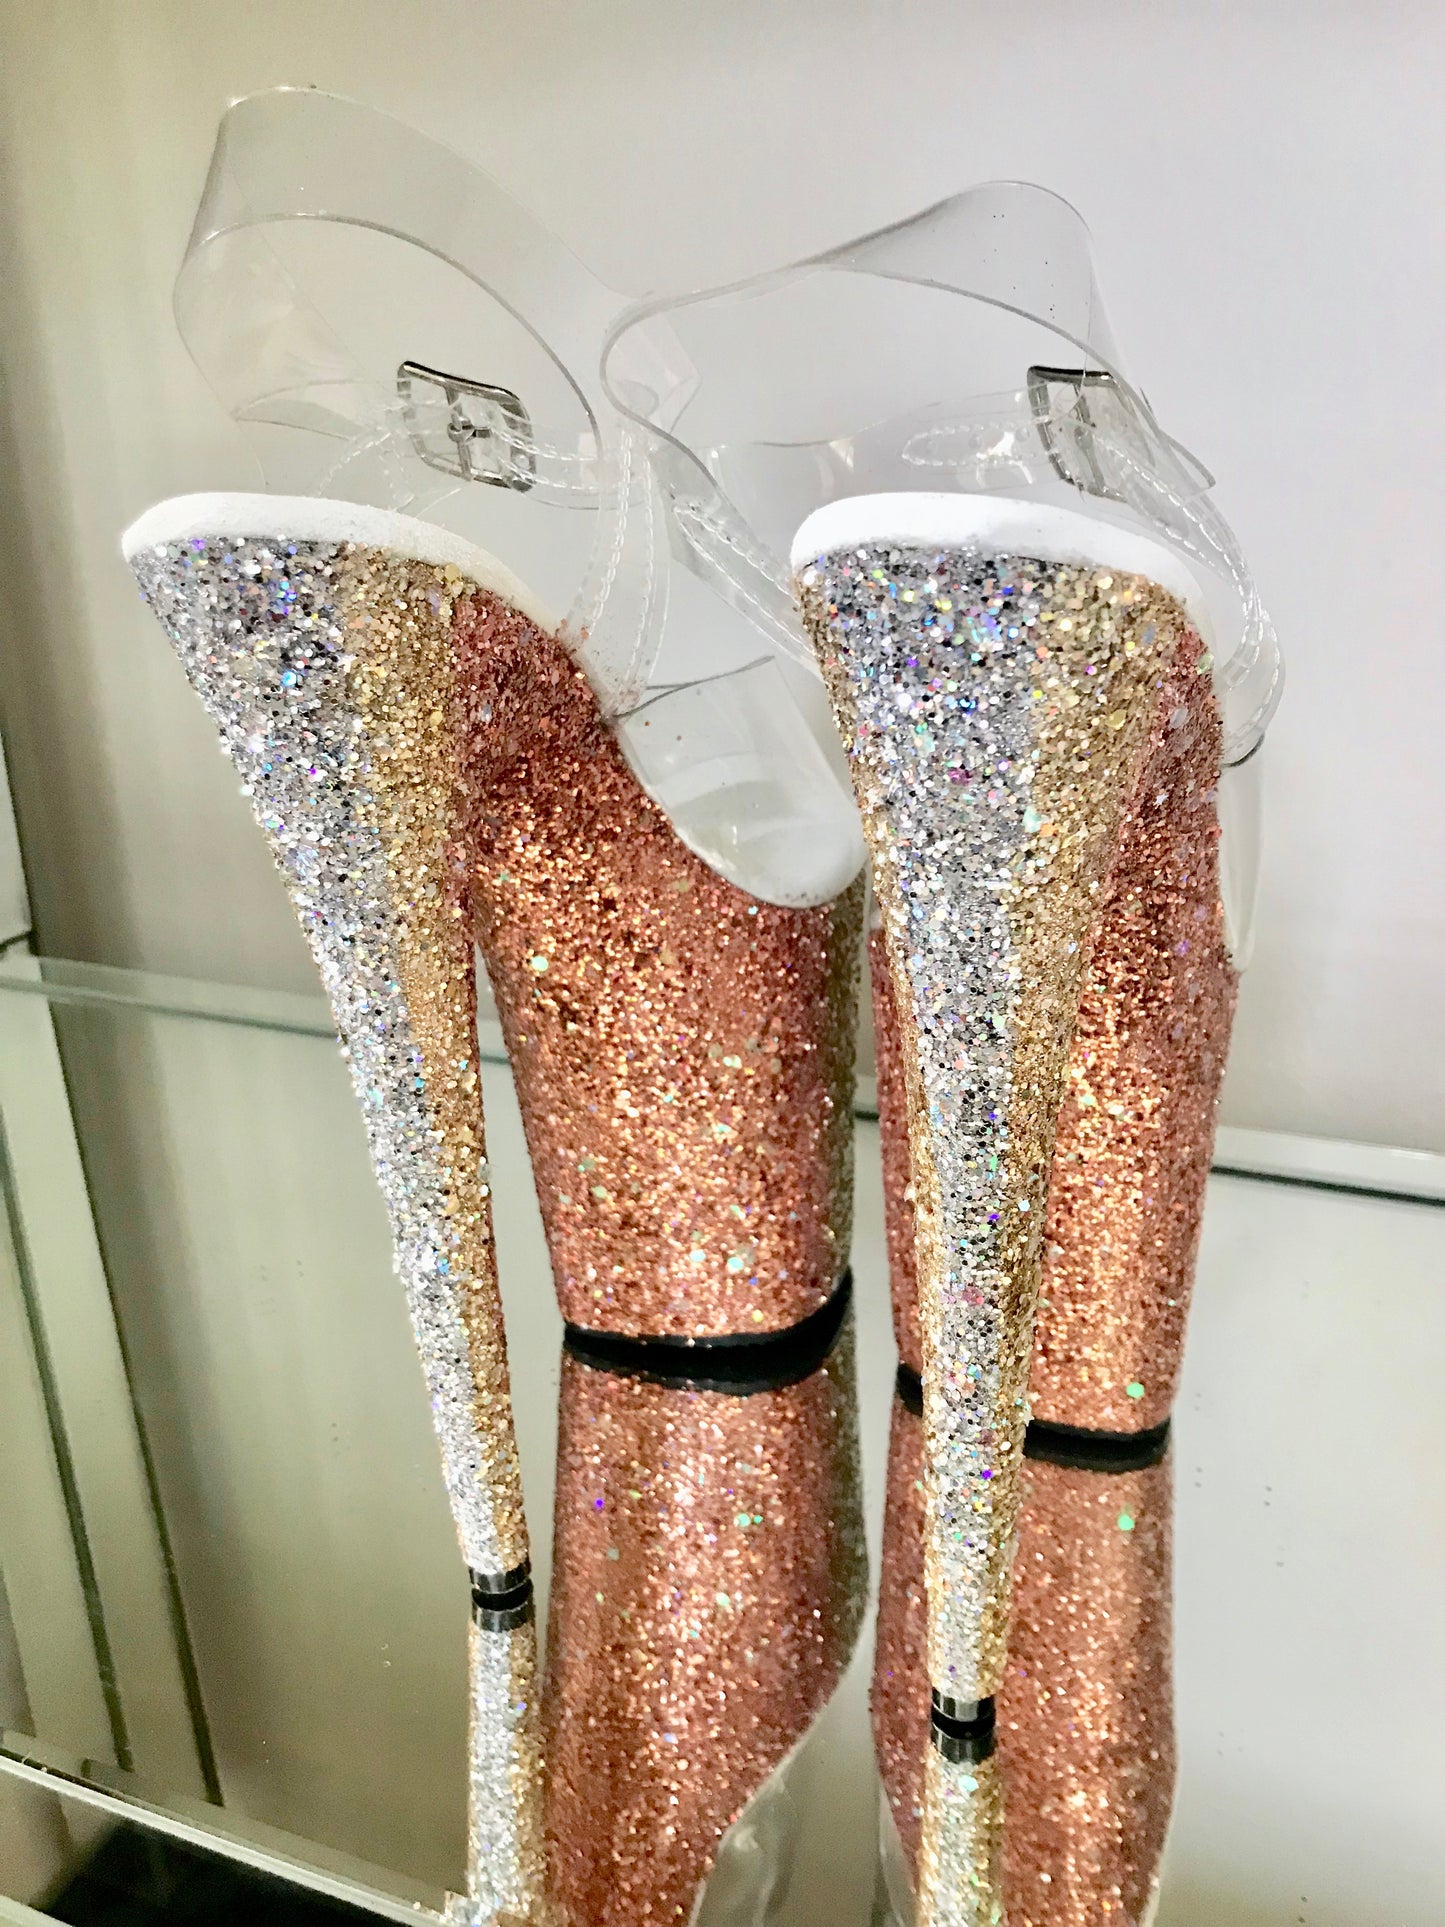 Platform heels with clear straps, and dual Ombre with gold and orange glitter. Shades of gold starting at the front of the platform, and back of the heels, blending to orange glitter under the arch, and down the inside of the heels. White soles.